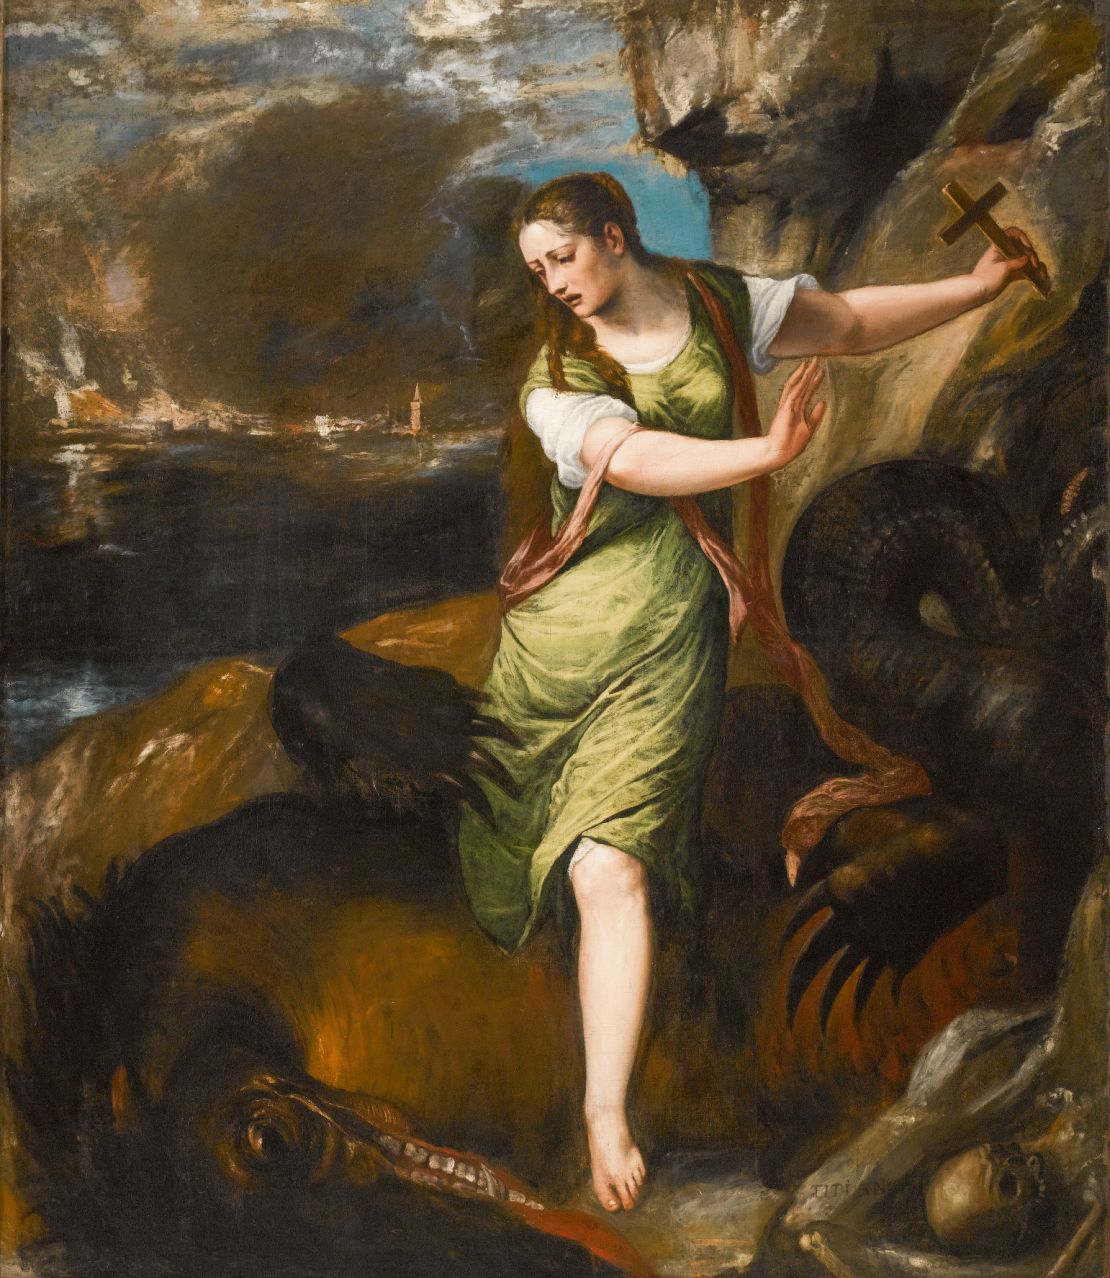 "Saint Margaret" by Titian will go on sale at Sotheby's New York on Feb. 1.